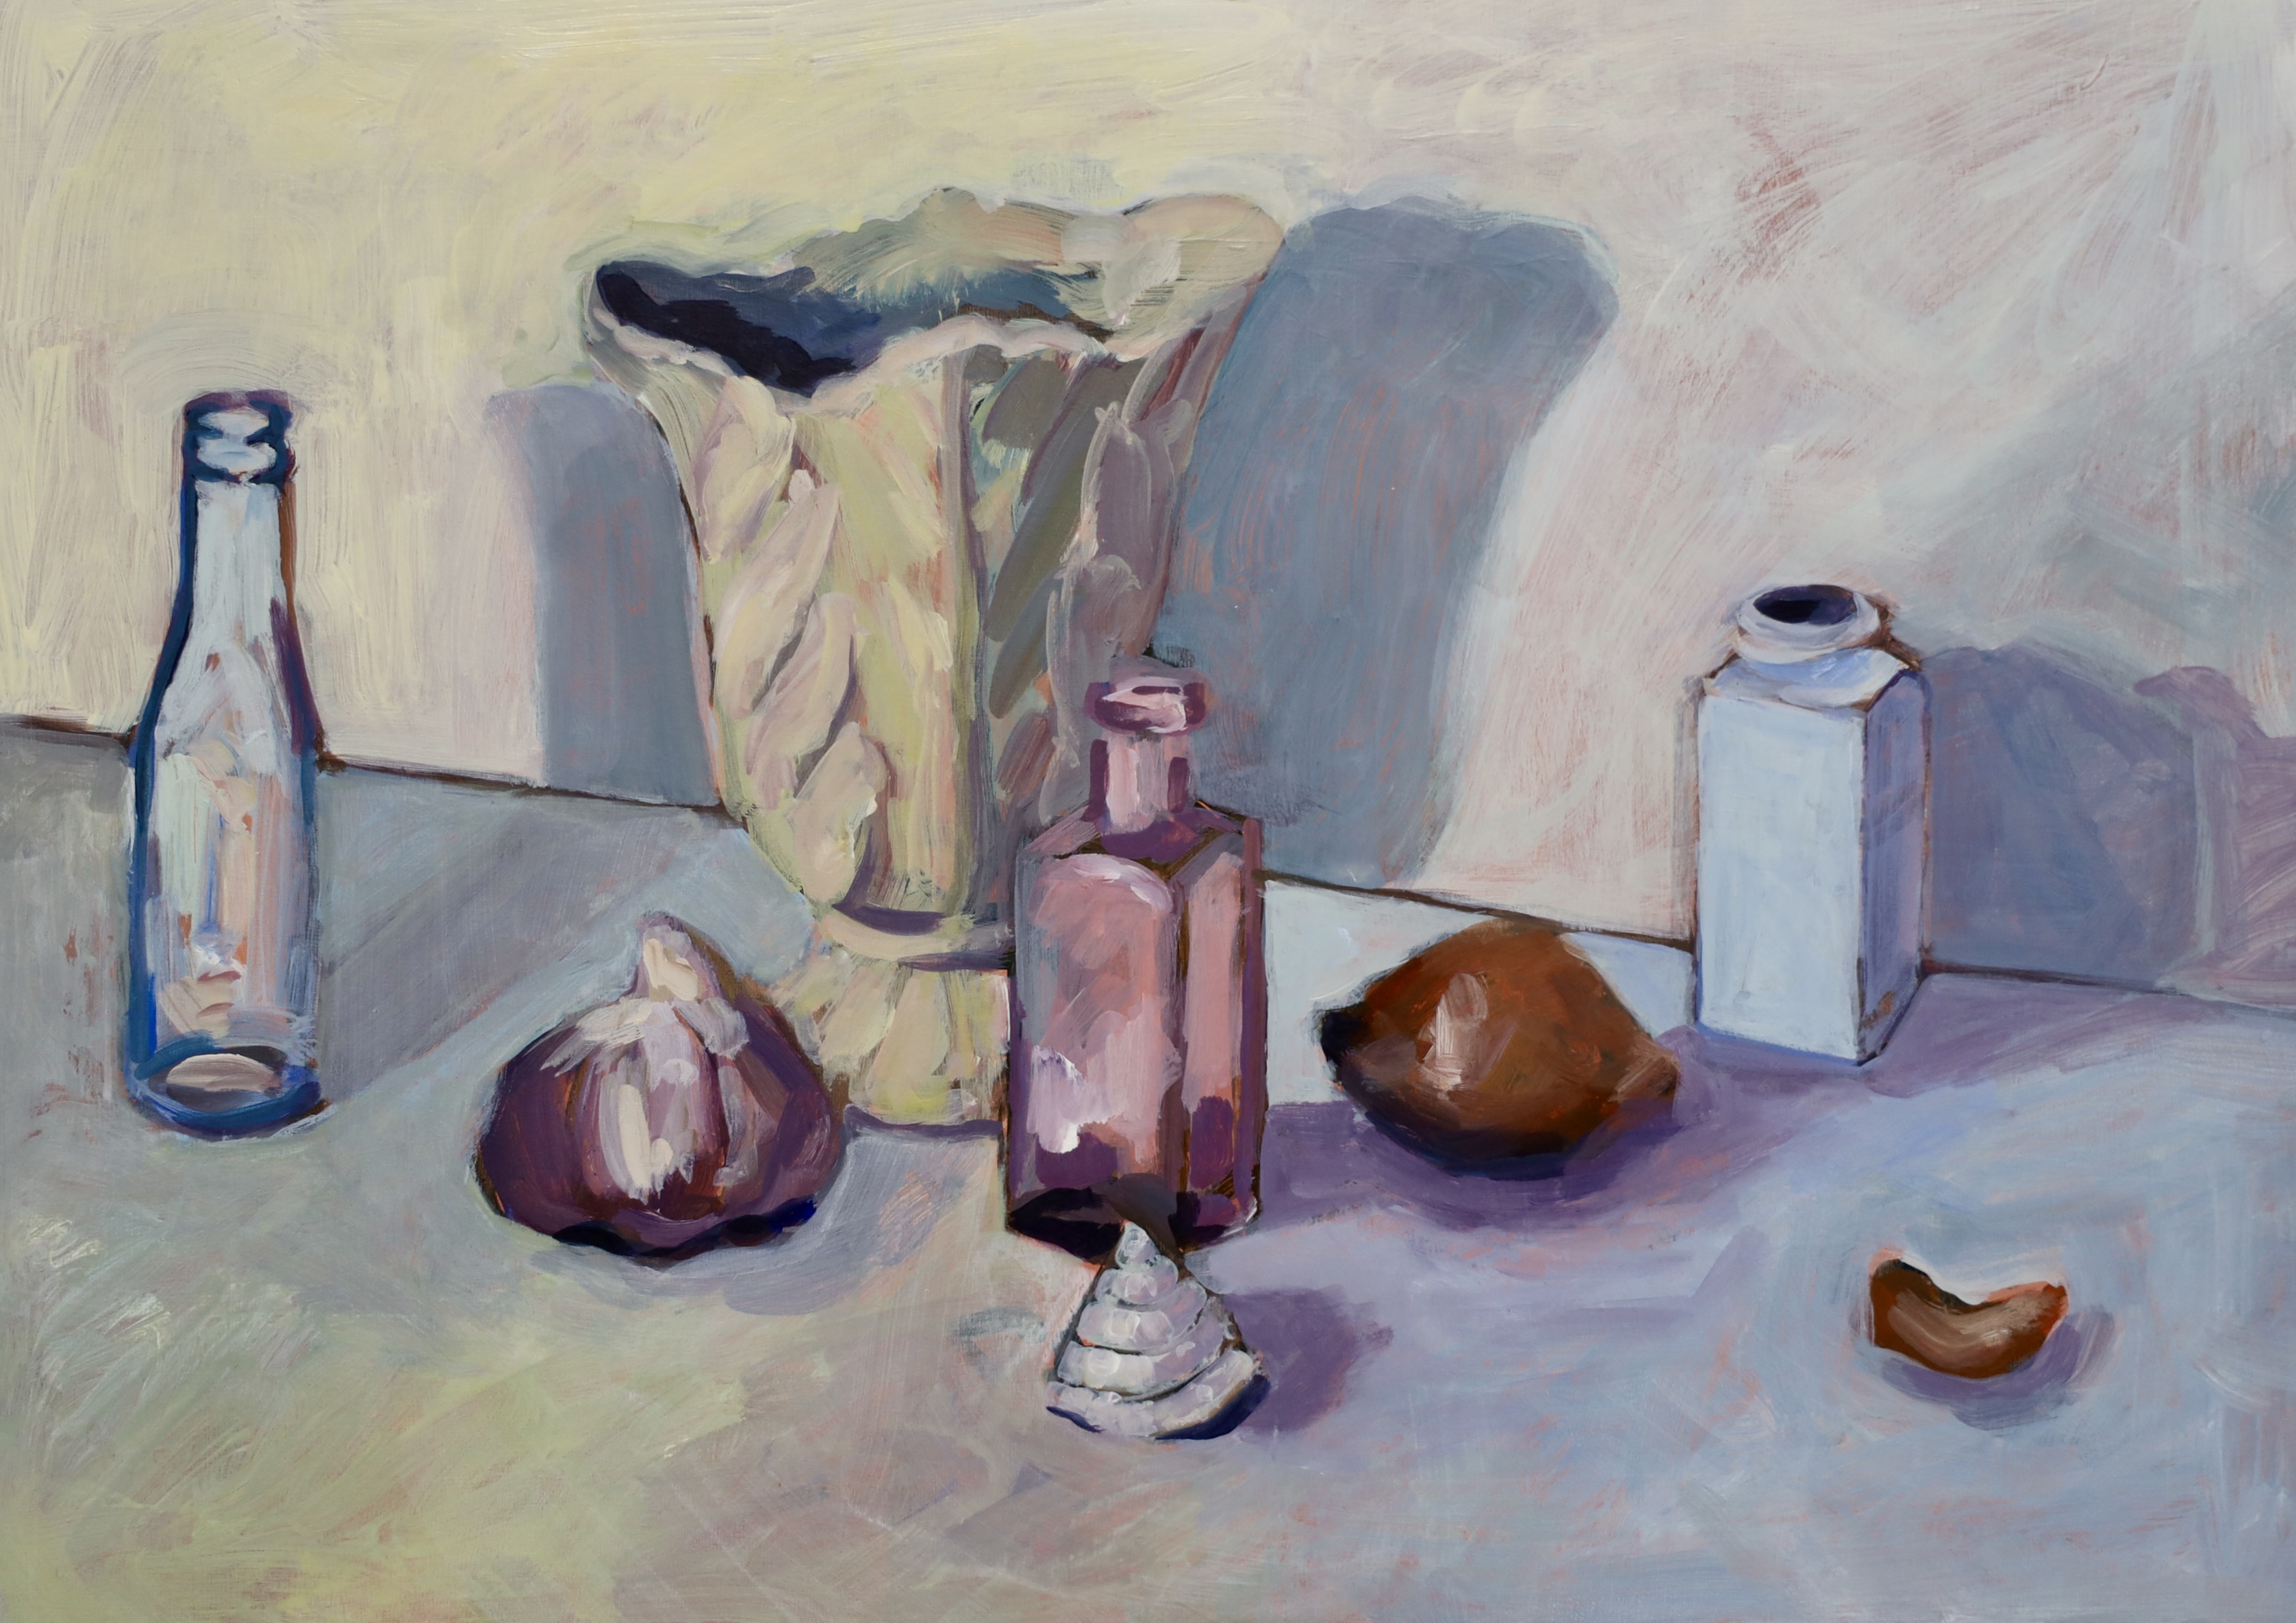 A still life painting of assorted vessels on a table.